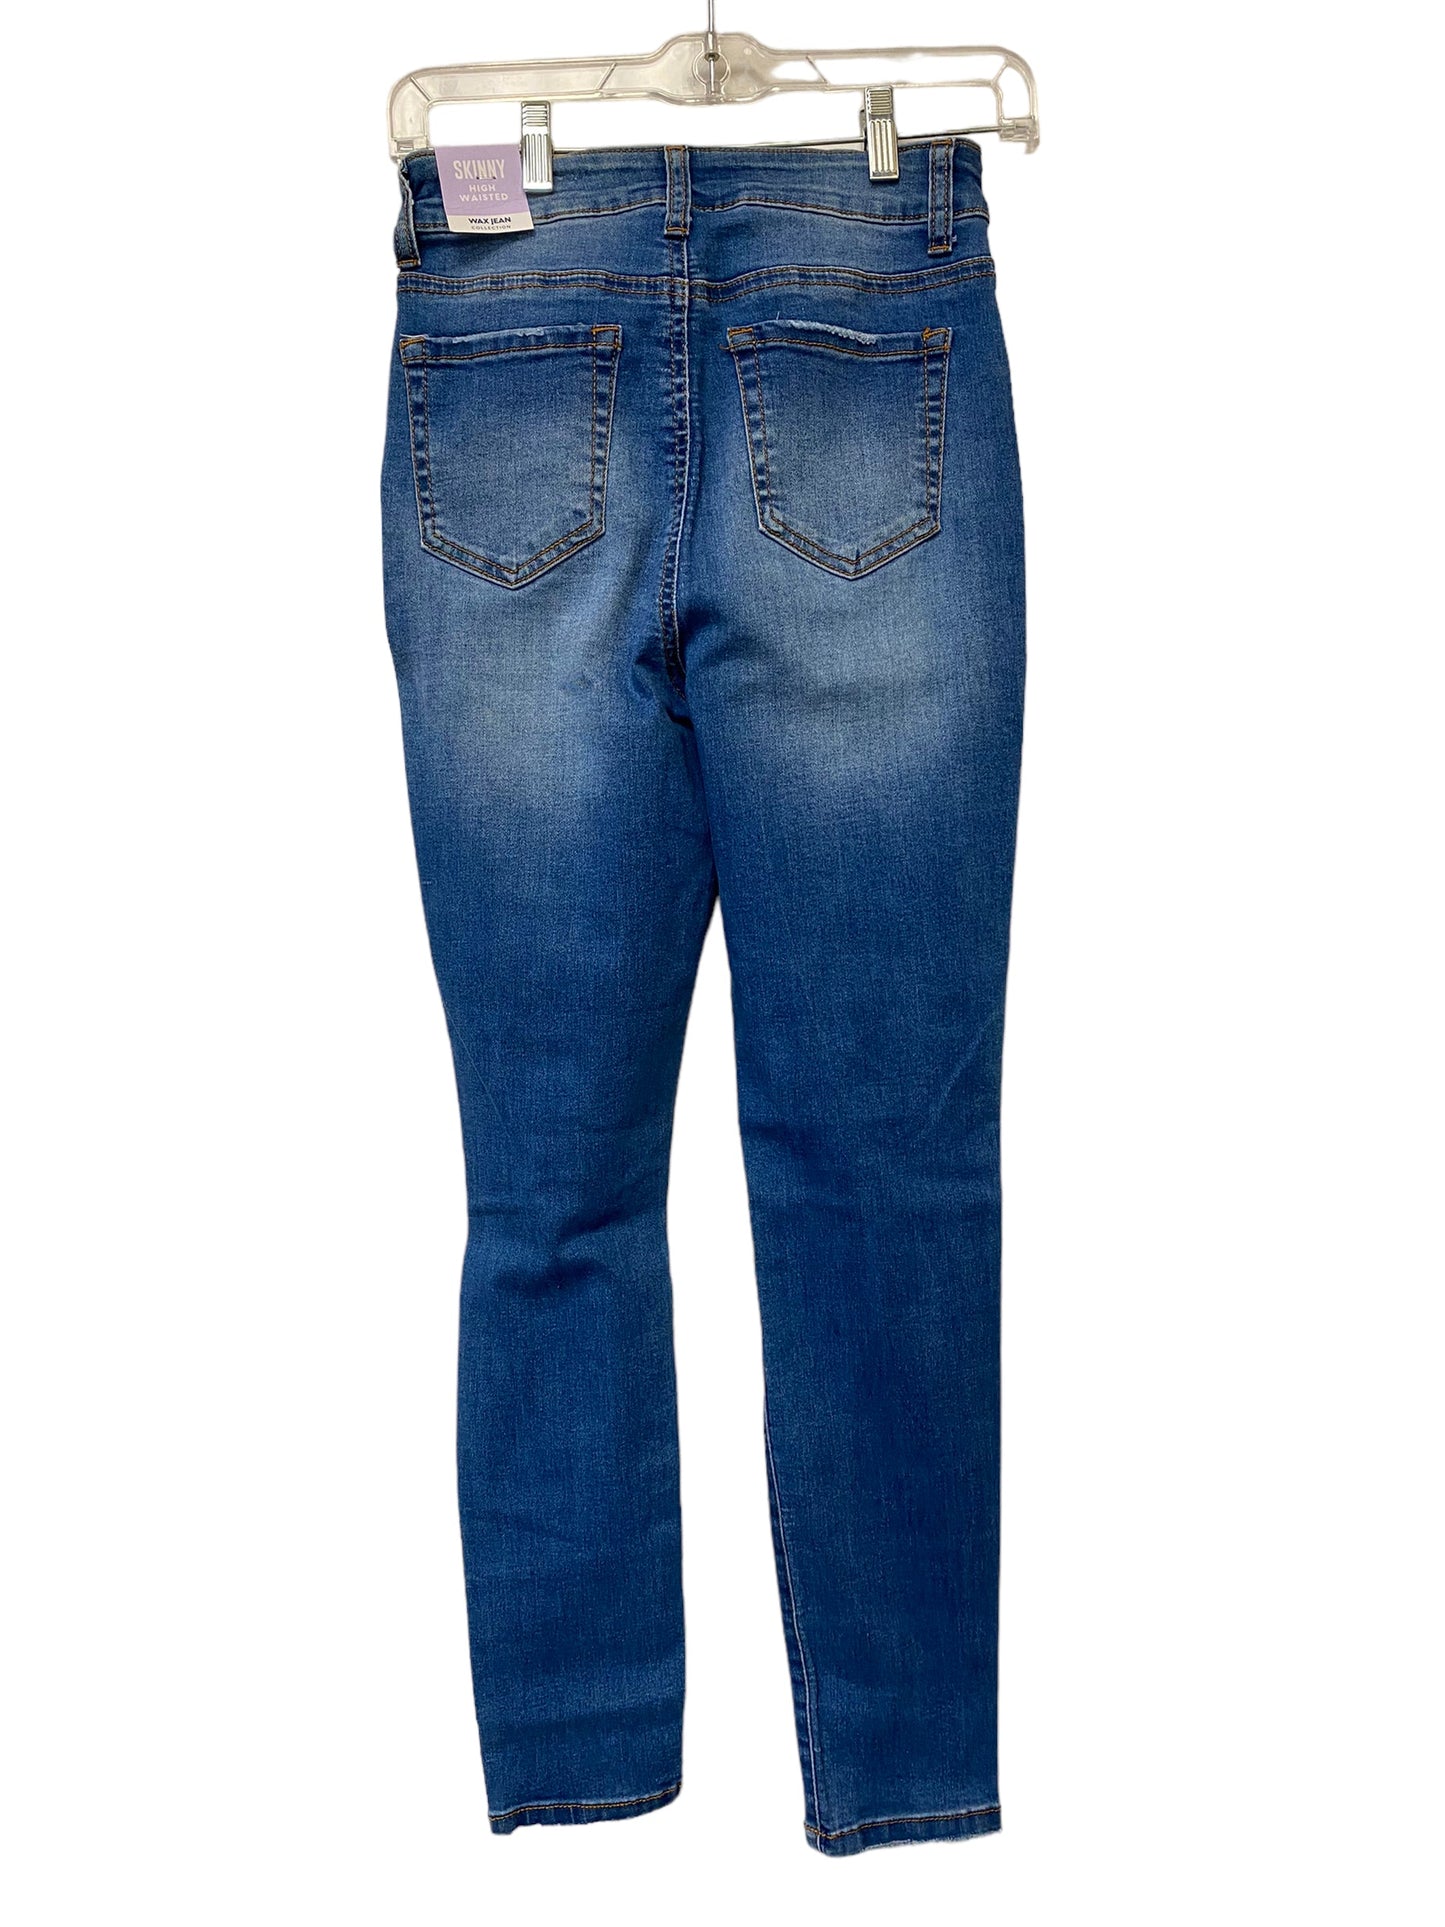 Jeans Skinny By Clothes Mentor  Size: 5